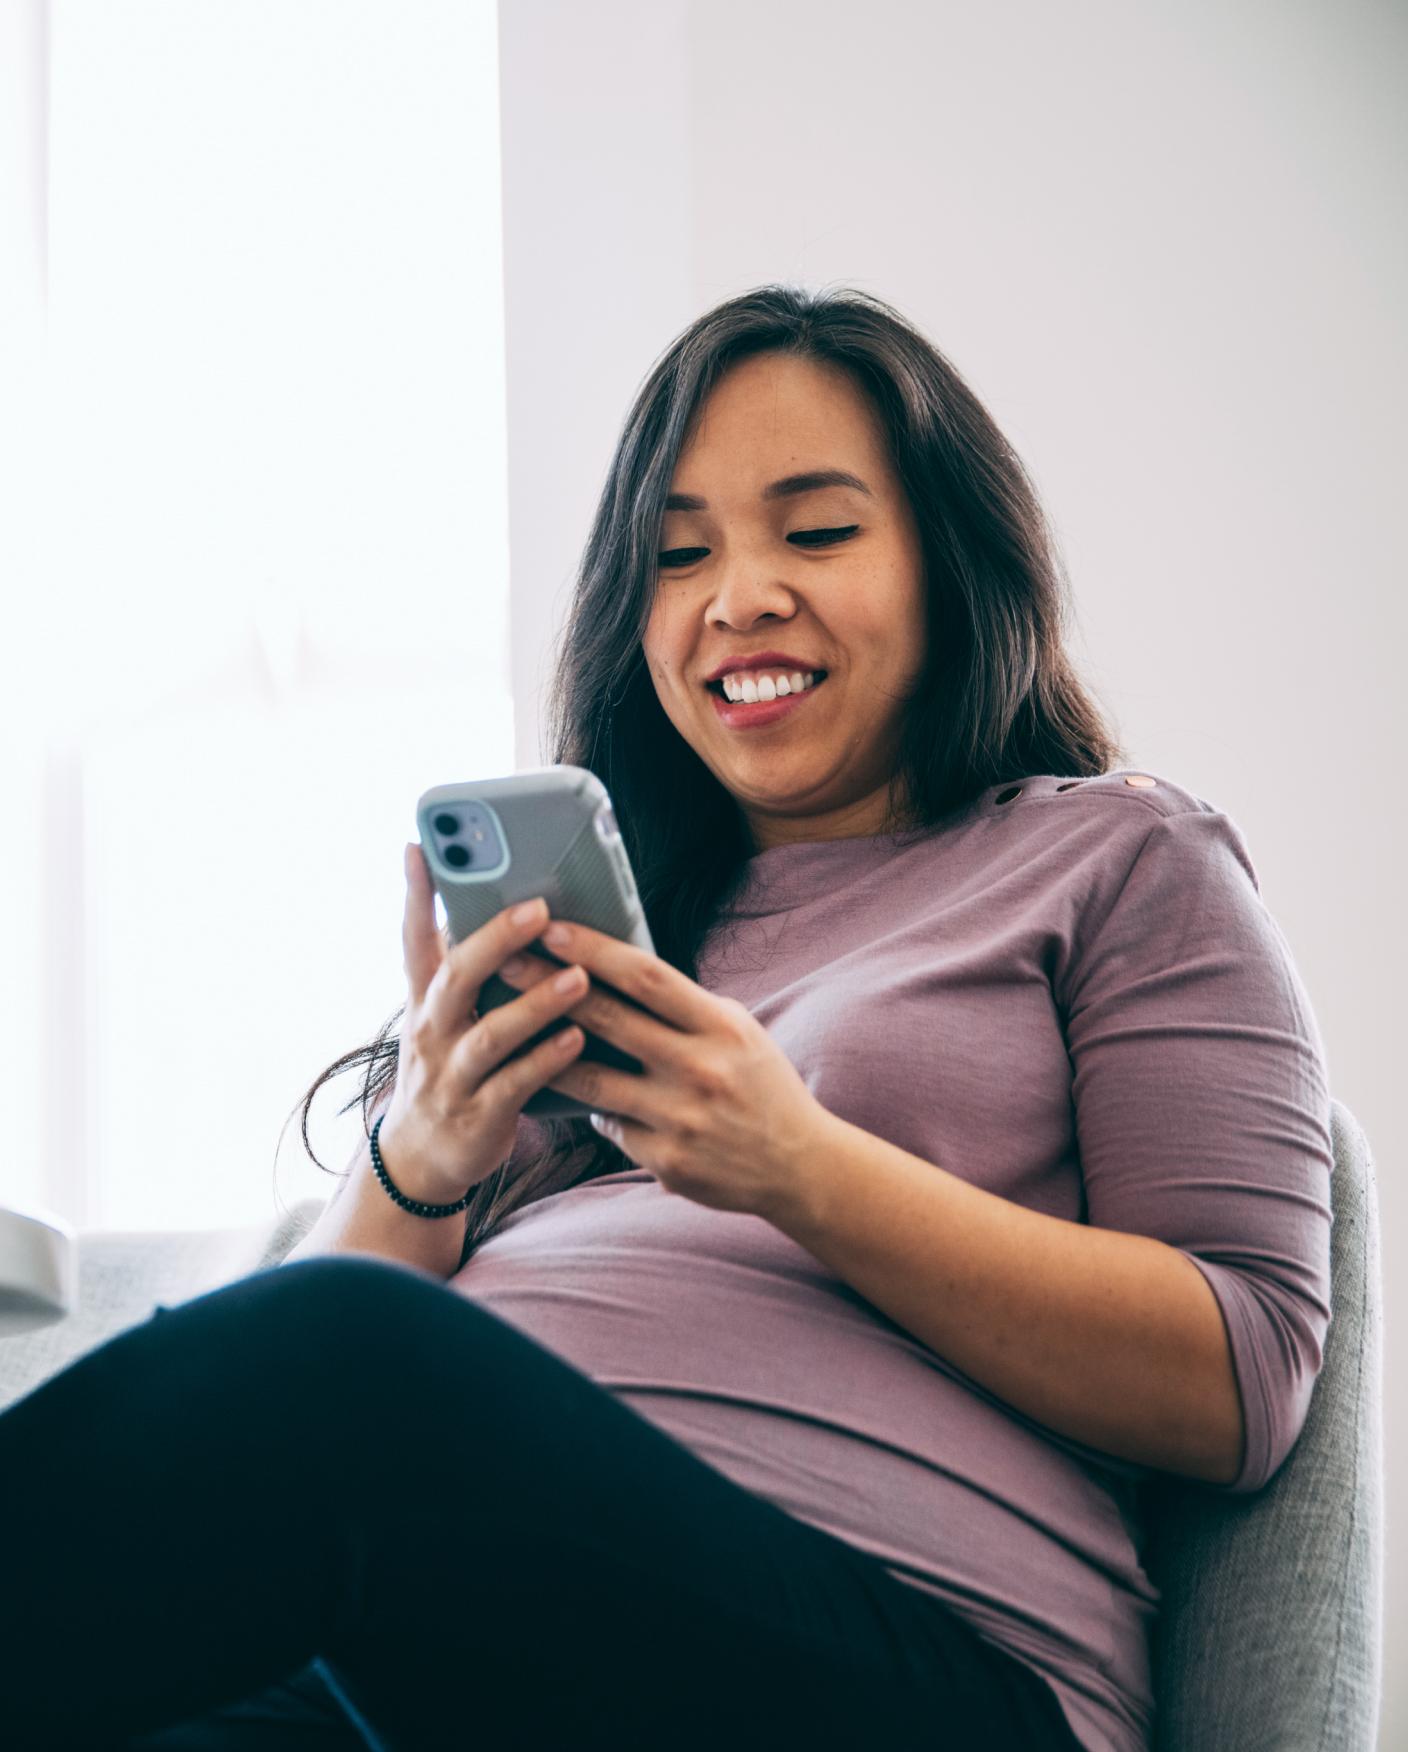 pregnant woman sits in chair and looks at phone while smiling